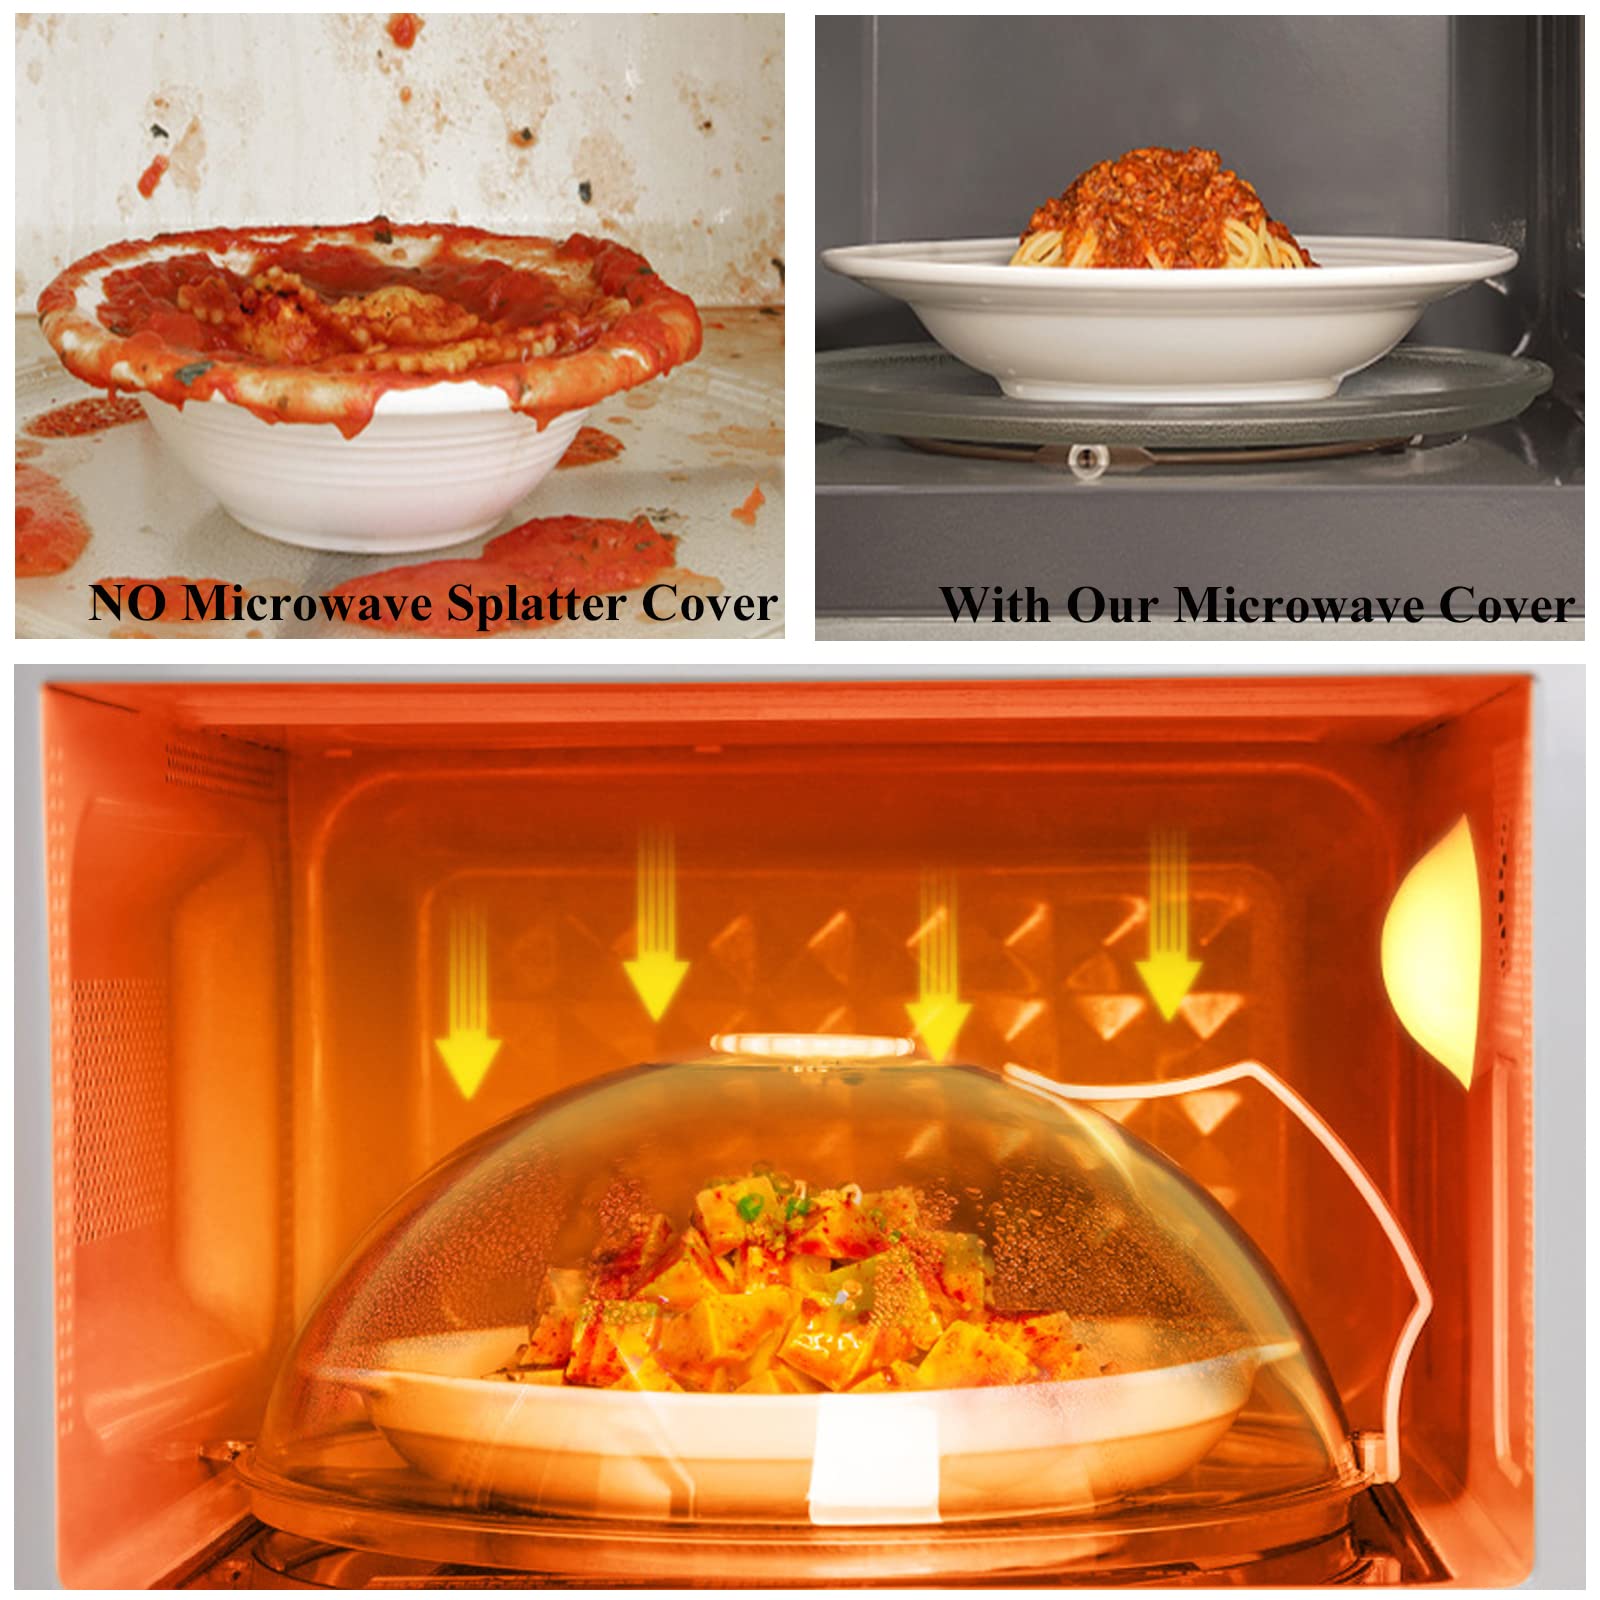 Microwave Splatter Cover for Food, Clear Like Gla Microwave Splash Guard Cooker lid, Dish bowl Plate Serving Cover with Steam Vent, BPA-Free, Saft Plastic, 10.5 Inchs